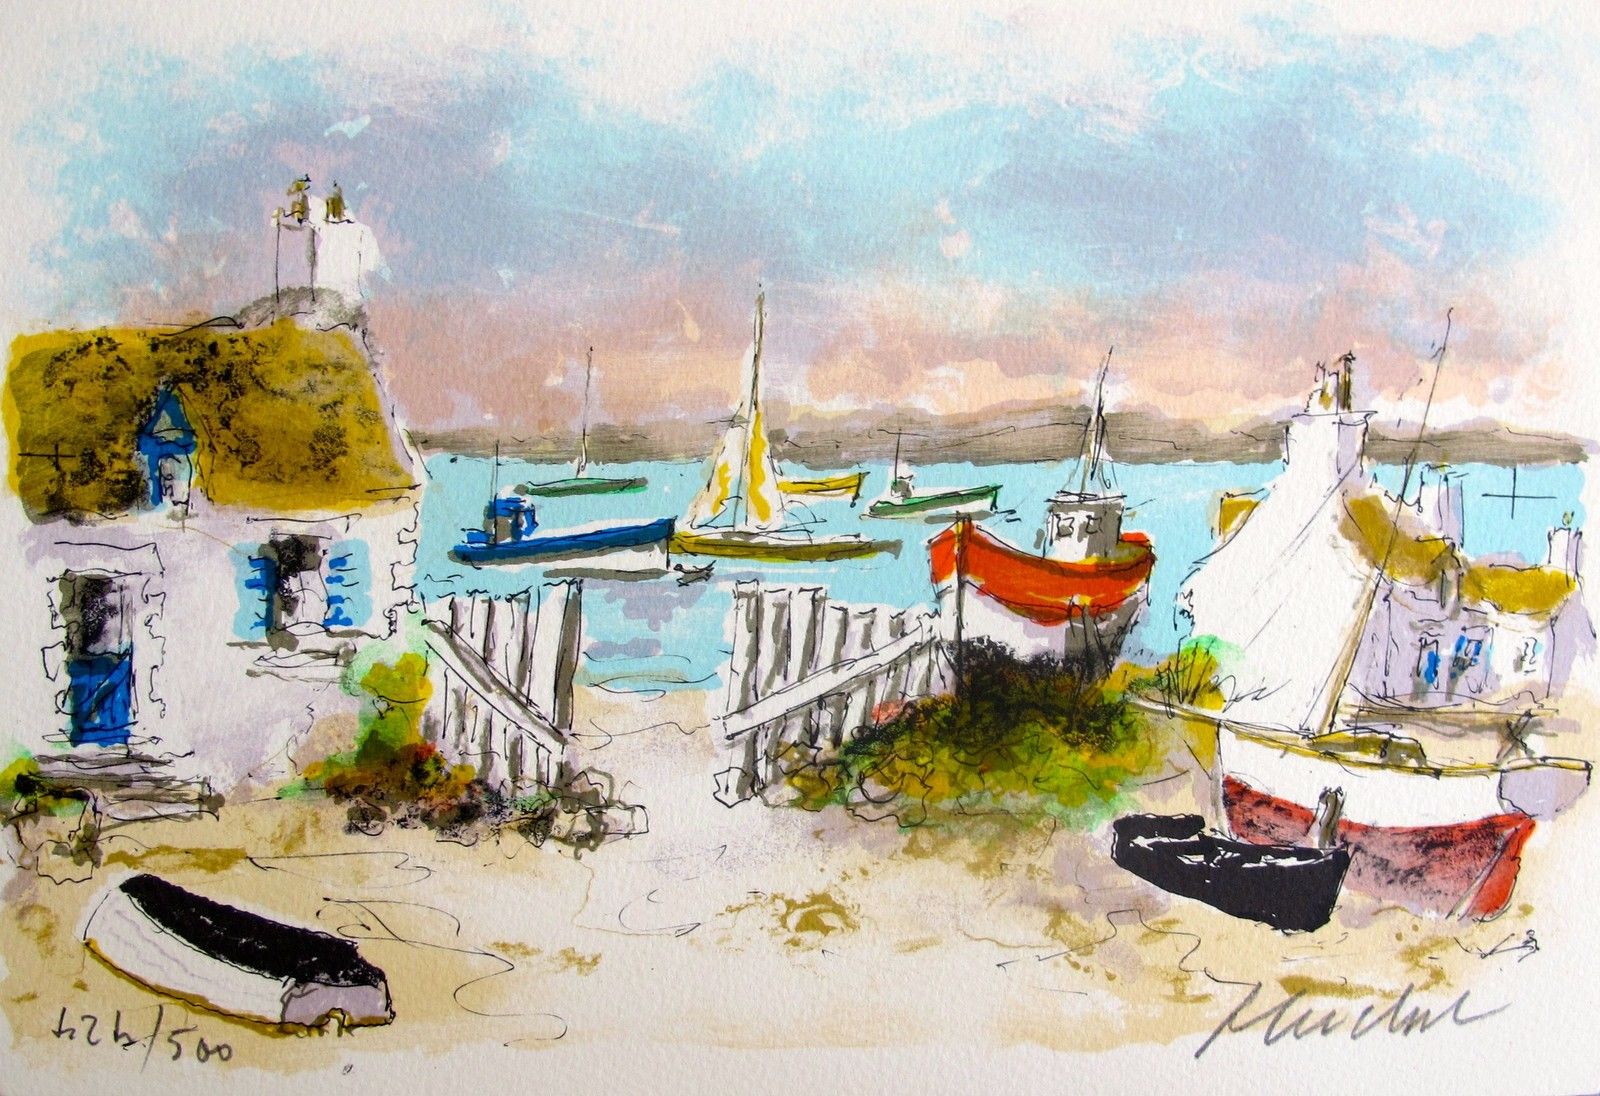 Urbain Huchet COTTAGES IN CHAUSEY Hand Signed Limited Edition Lithograph